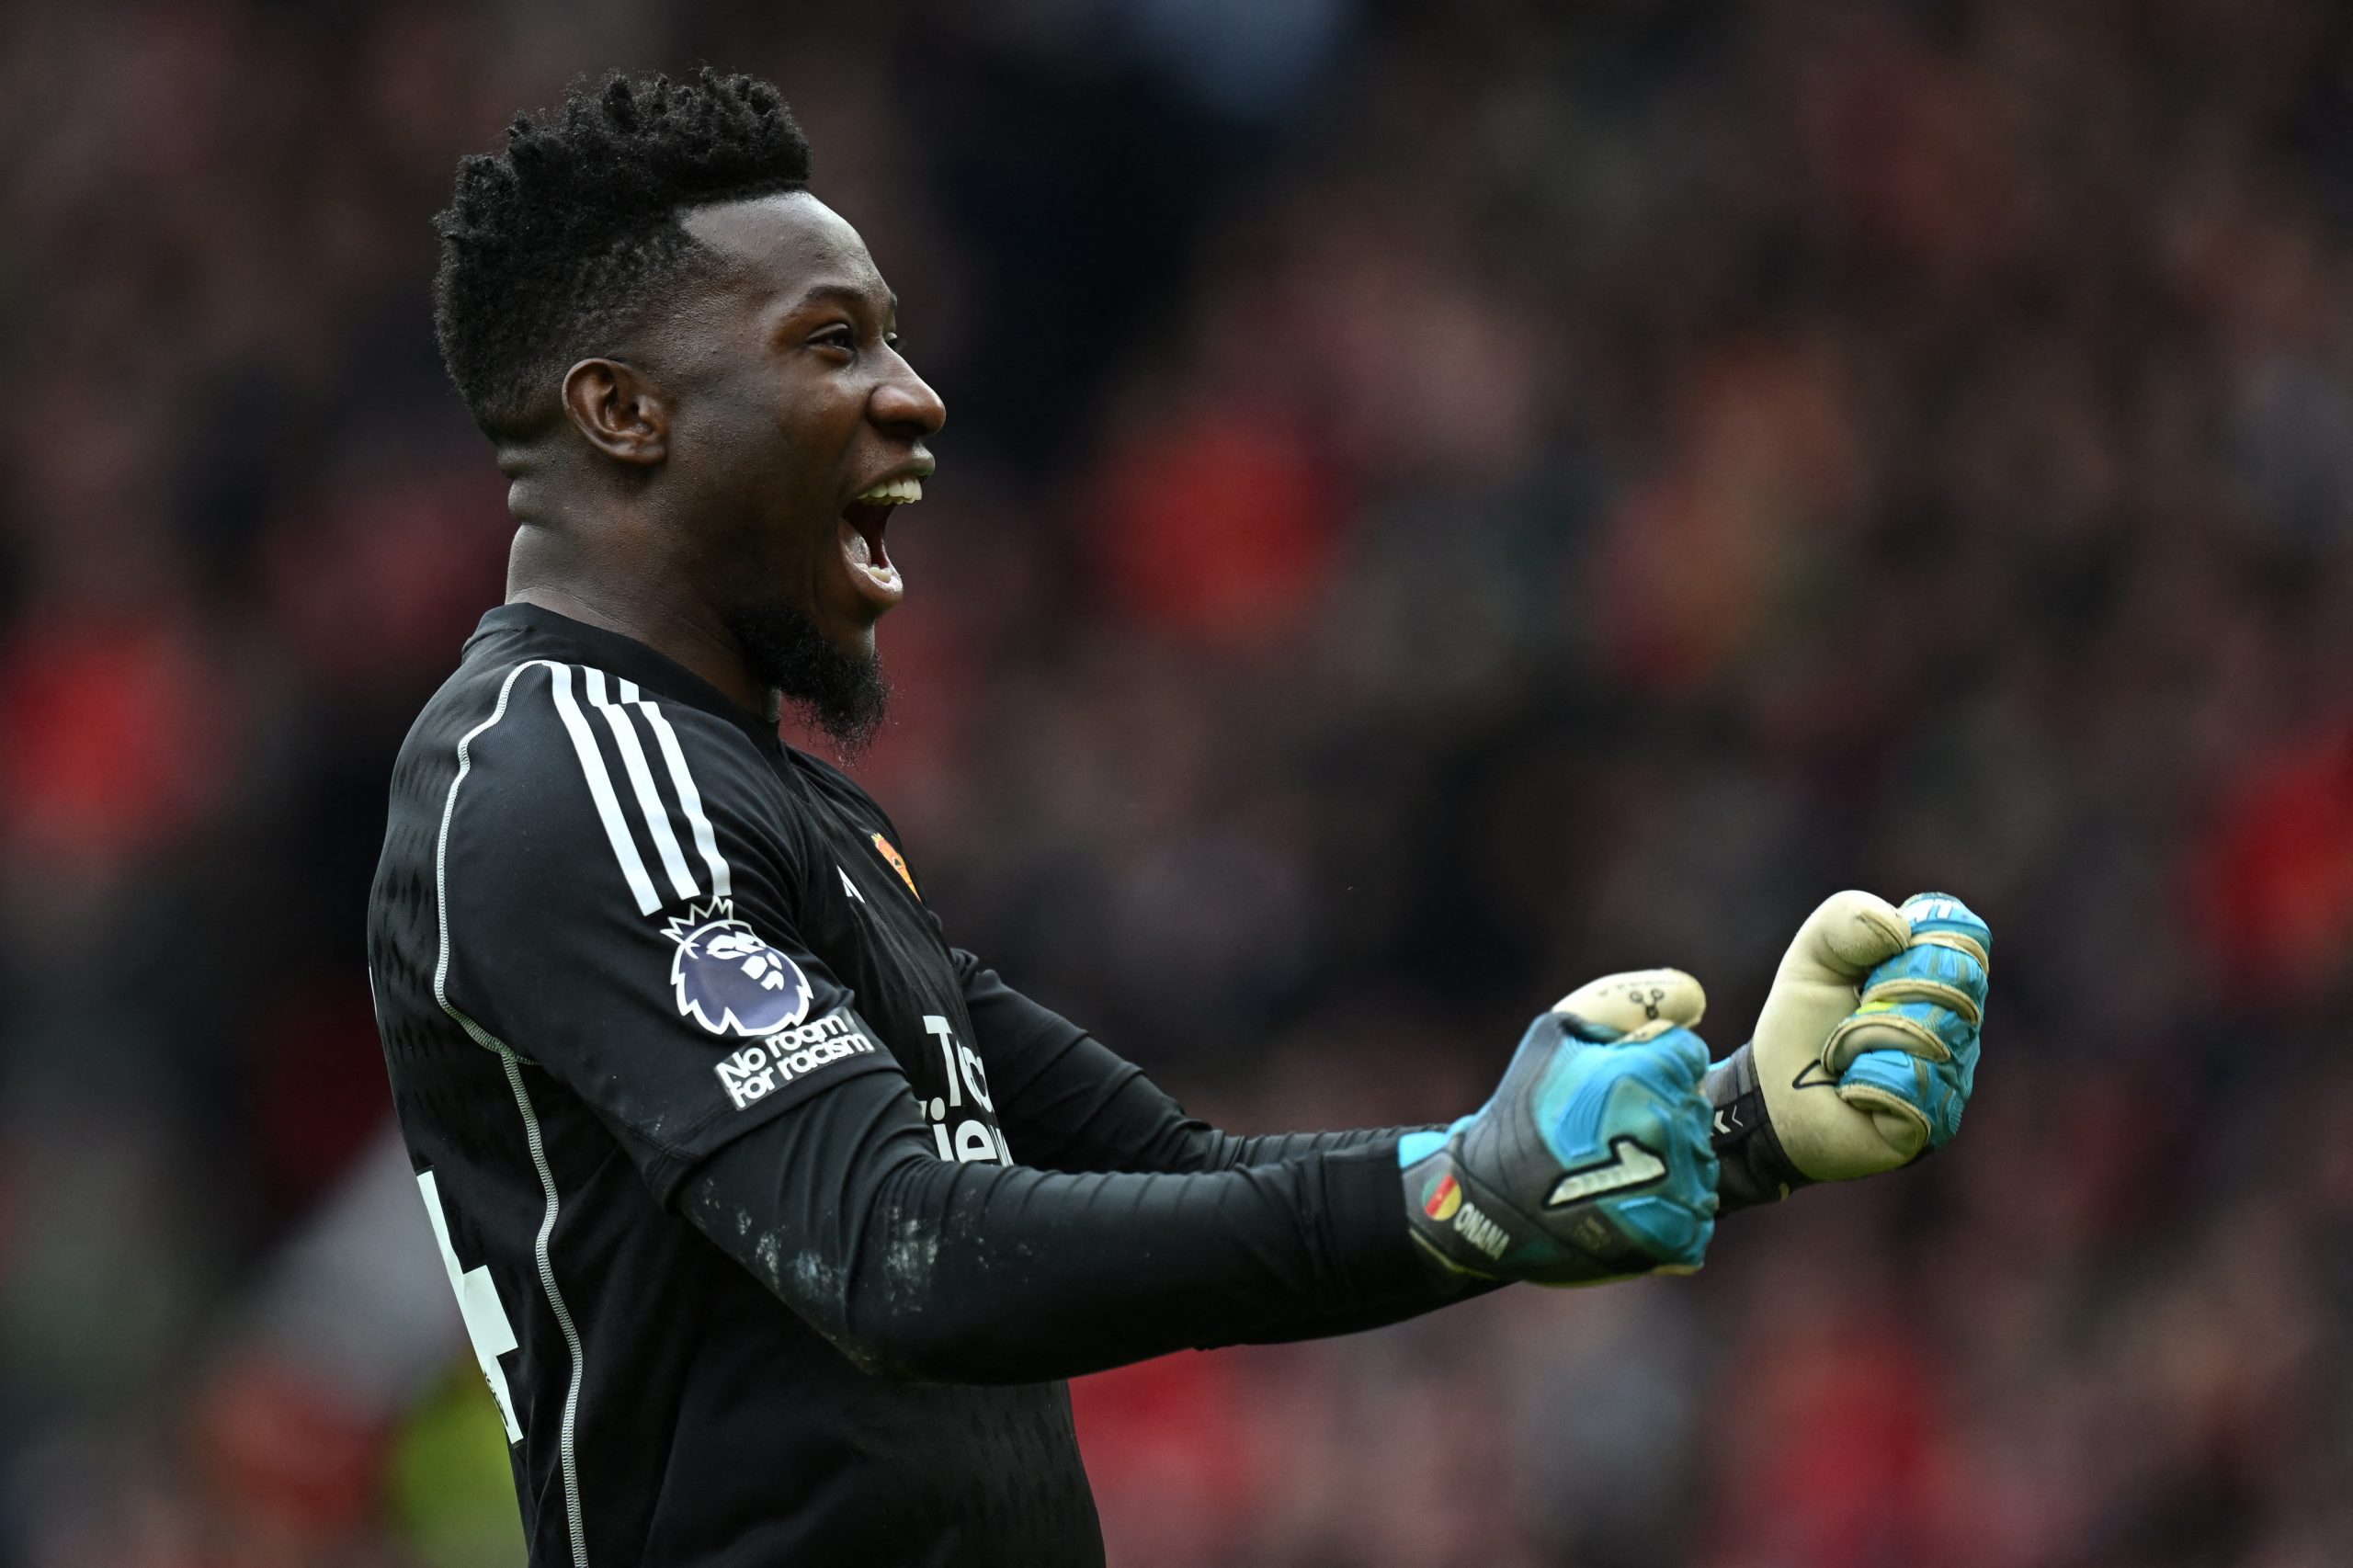 Andre Onana claims he was the best goalkeeper in the world when Manchester United signed him